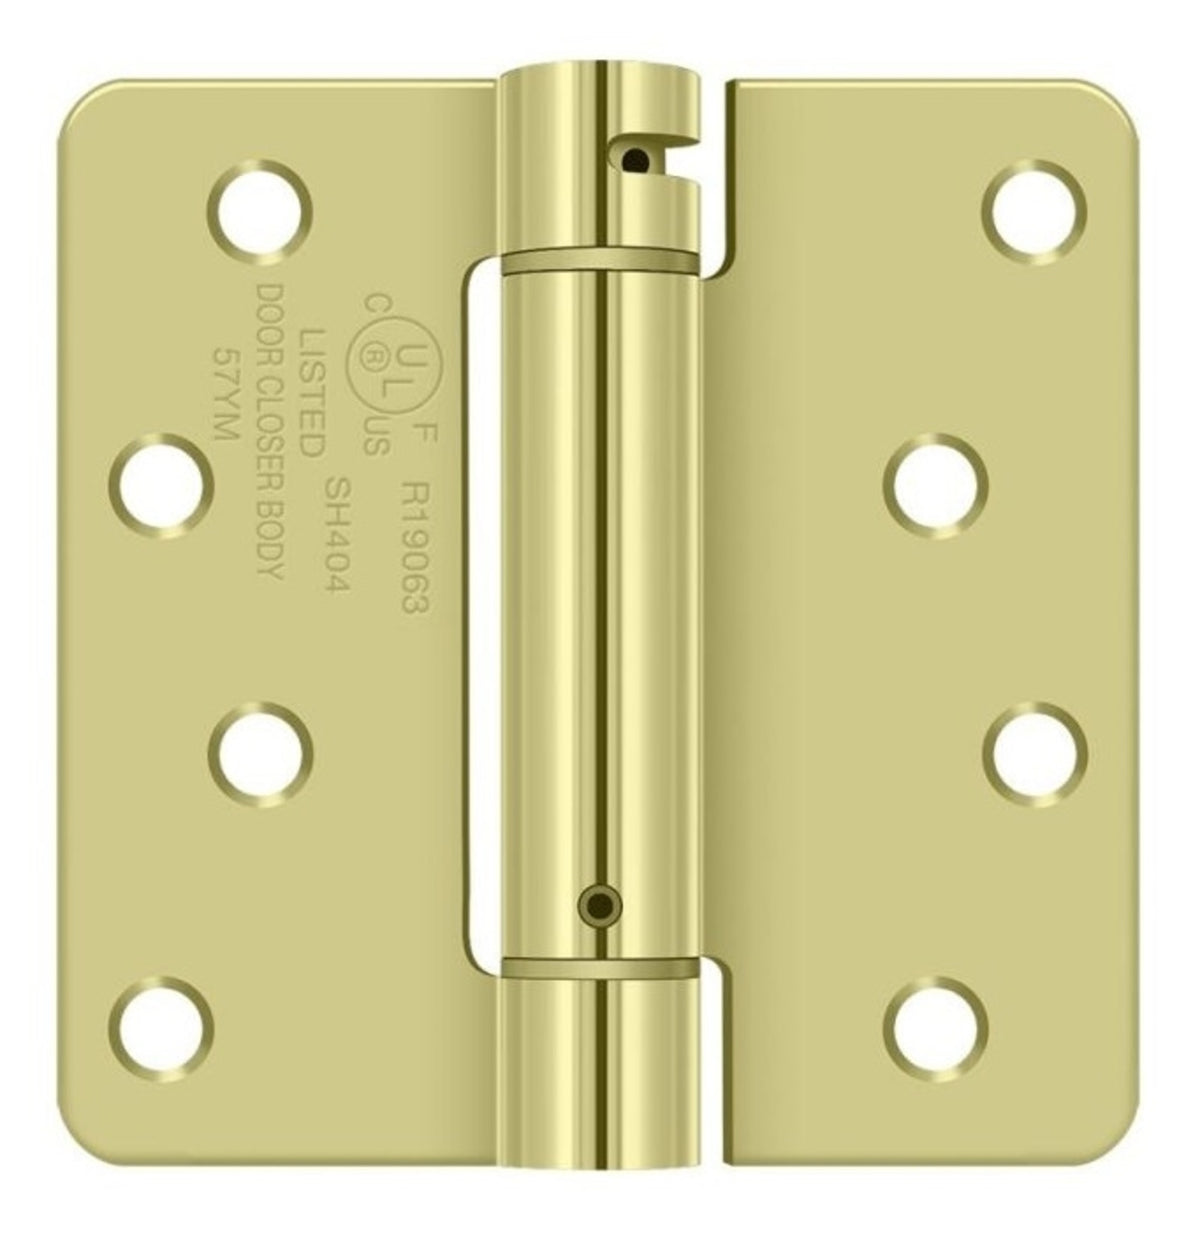 Deltana DSH4R42D Spring Hinge, Zinc Dichromate Plated, 4" x 4" x 1/4"